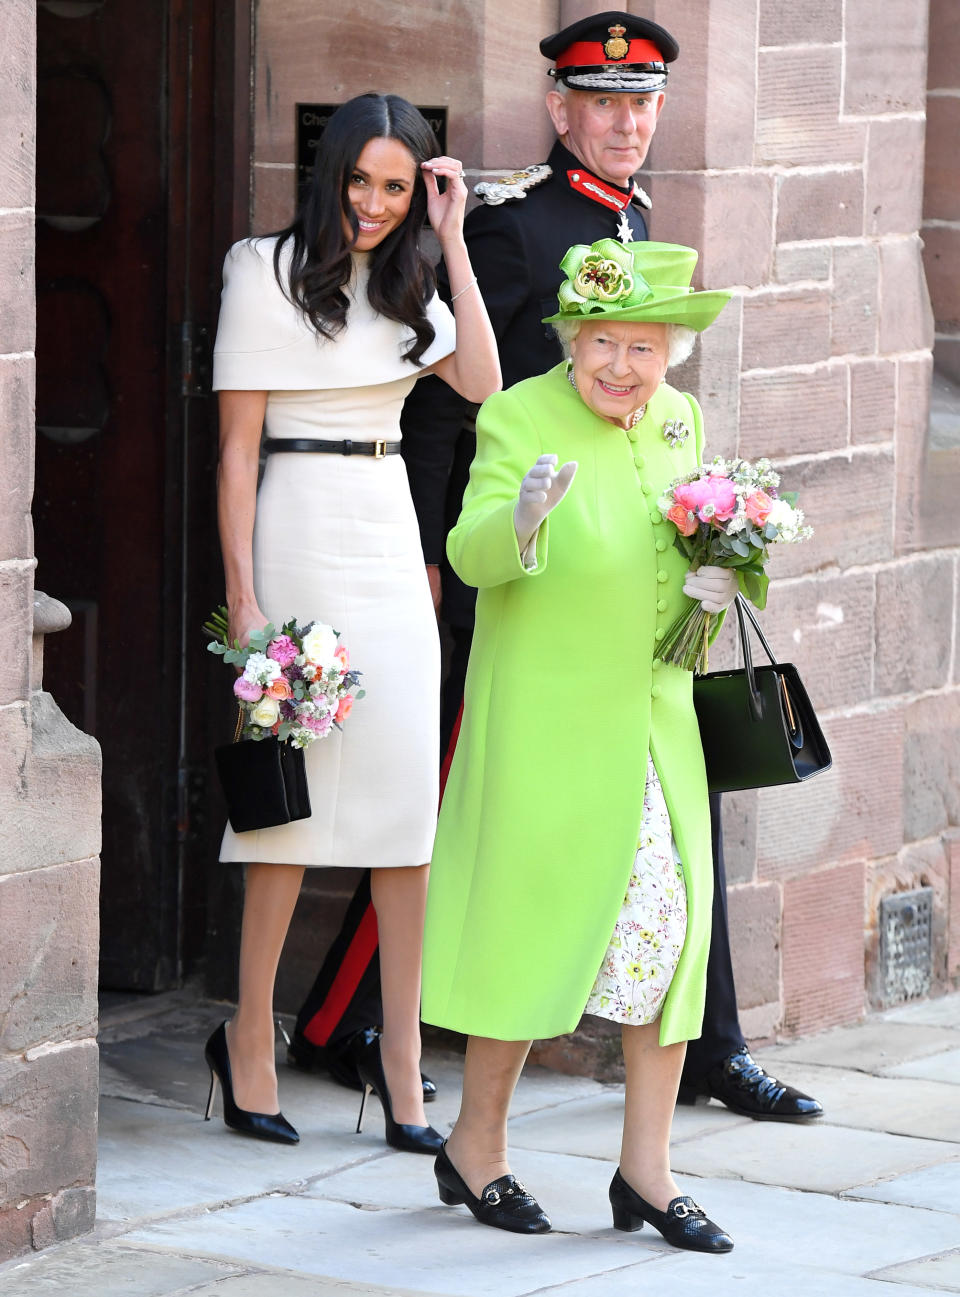 Markle accompanied the Queen to her first solo engagement in Cheshire.